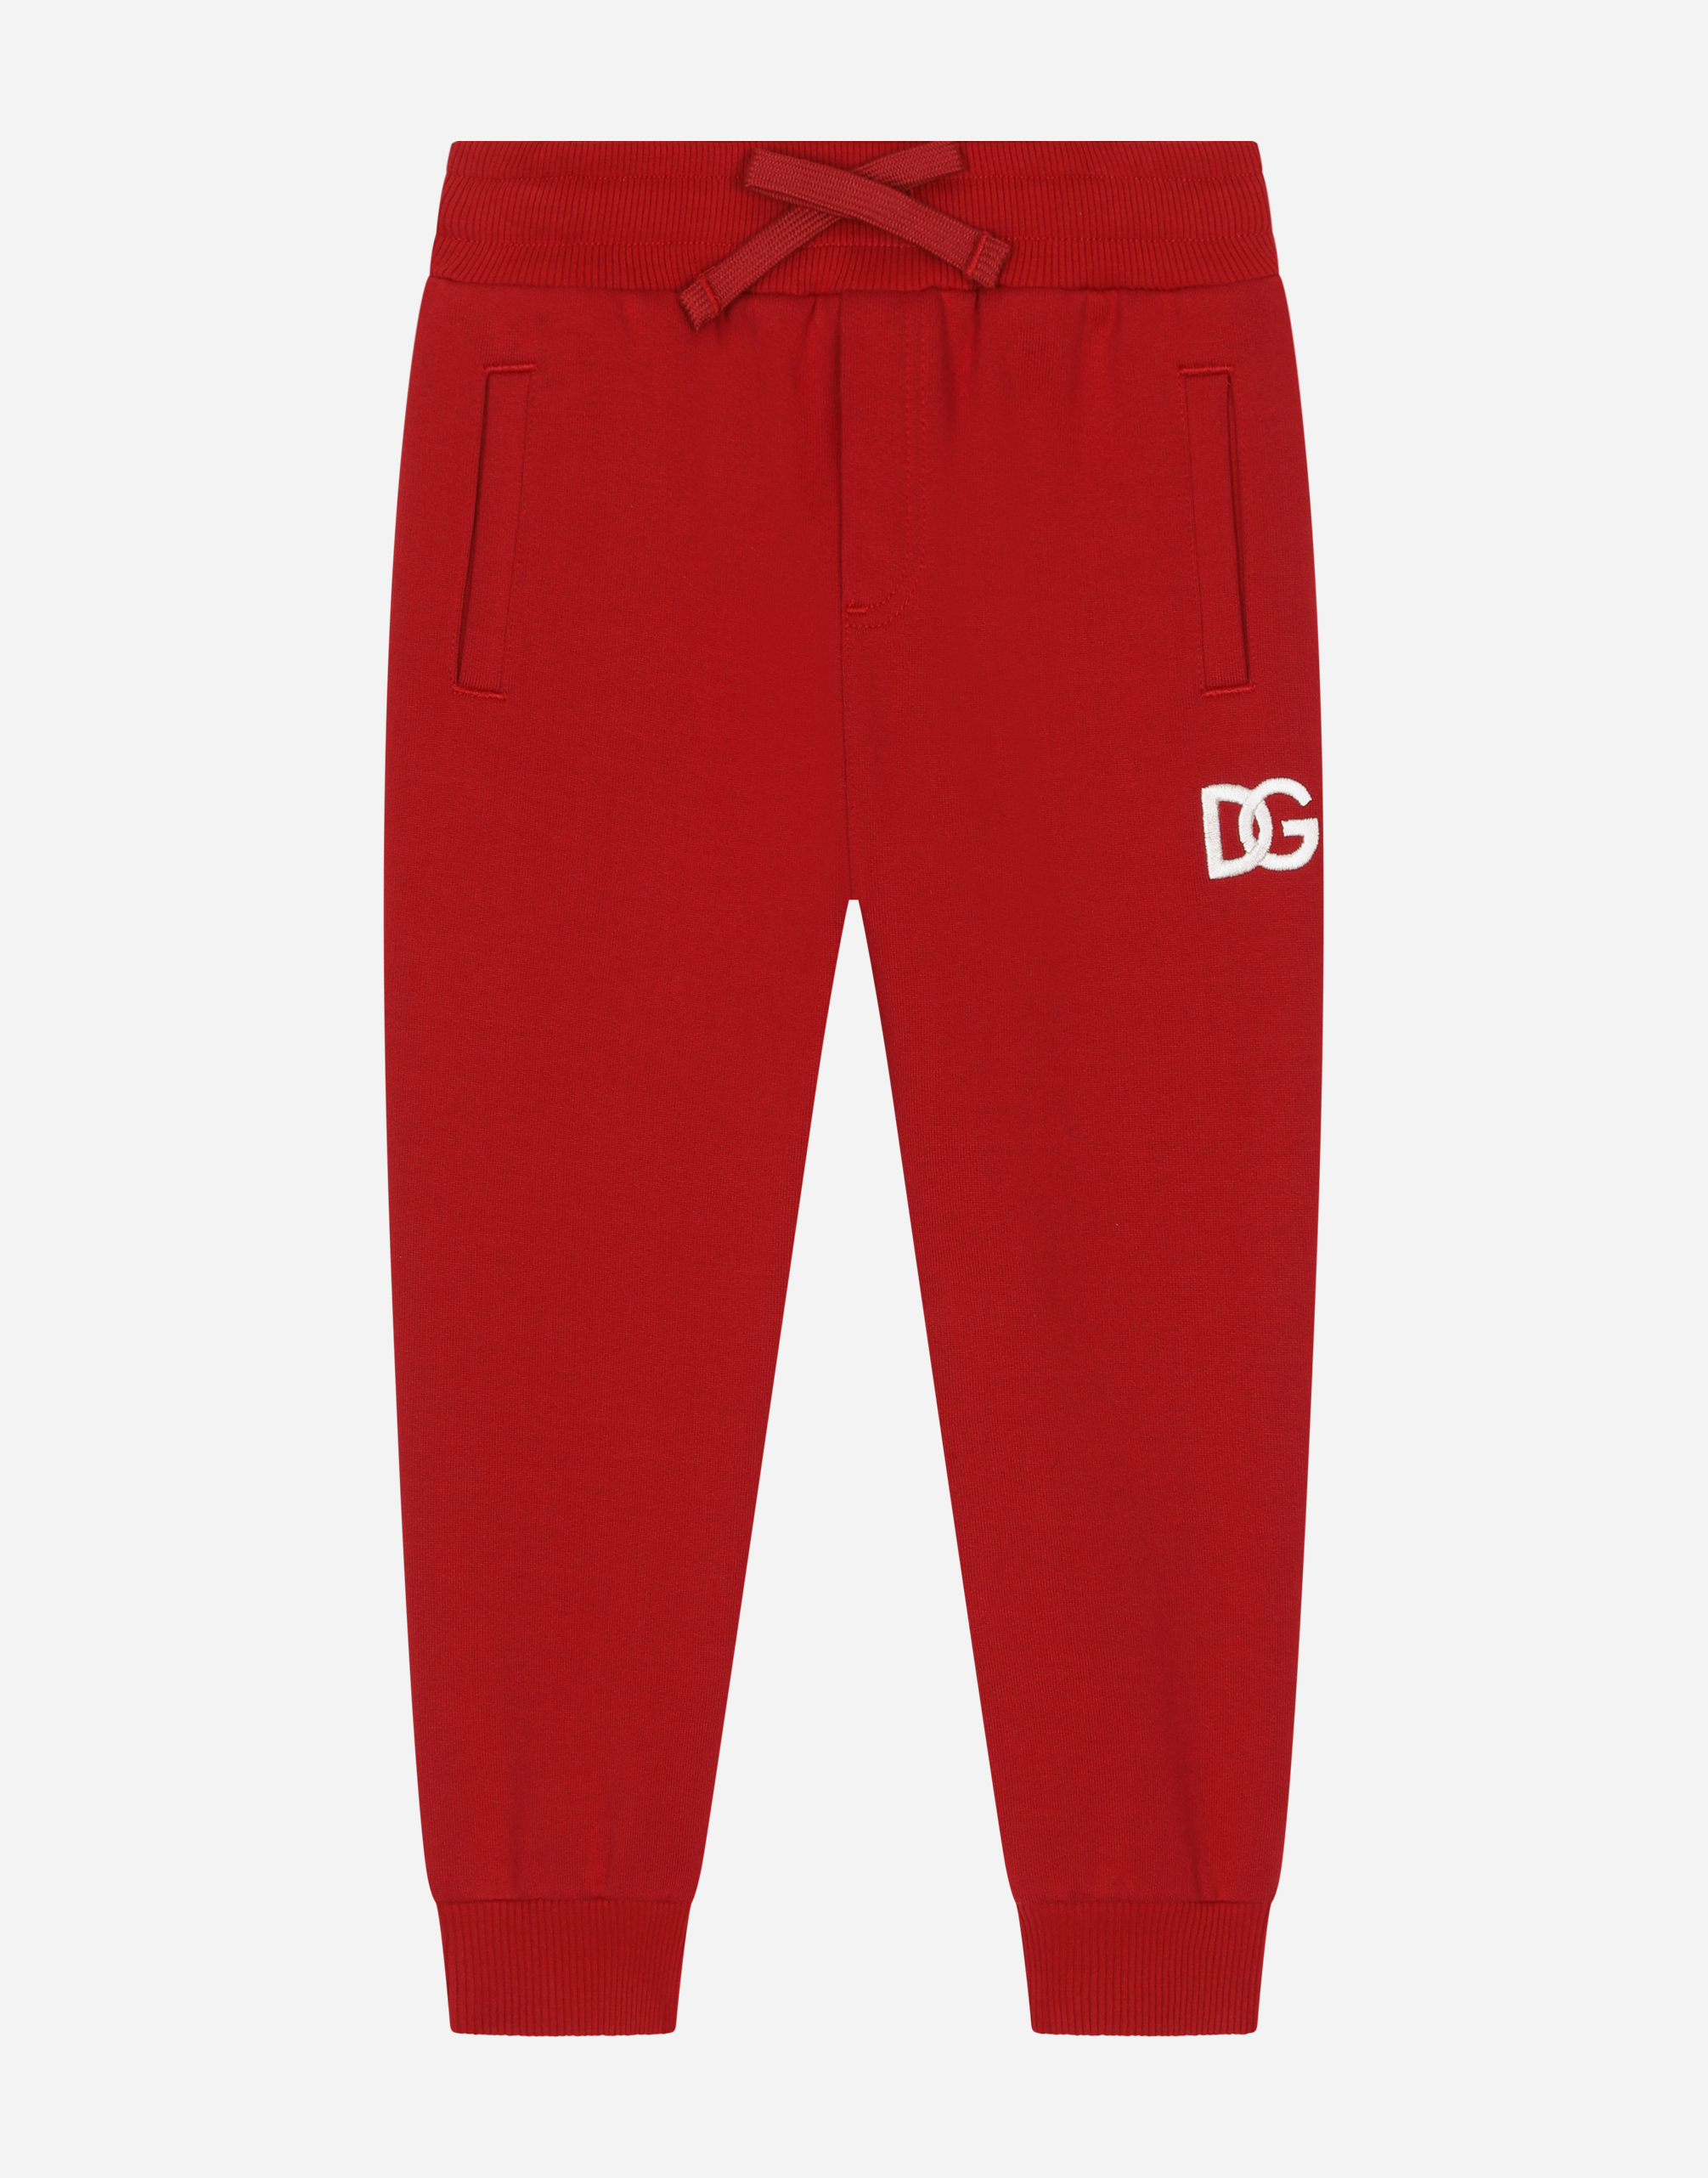 Jersey jogging pants with DG logo embroidery in Red